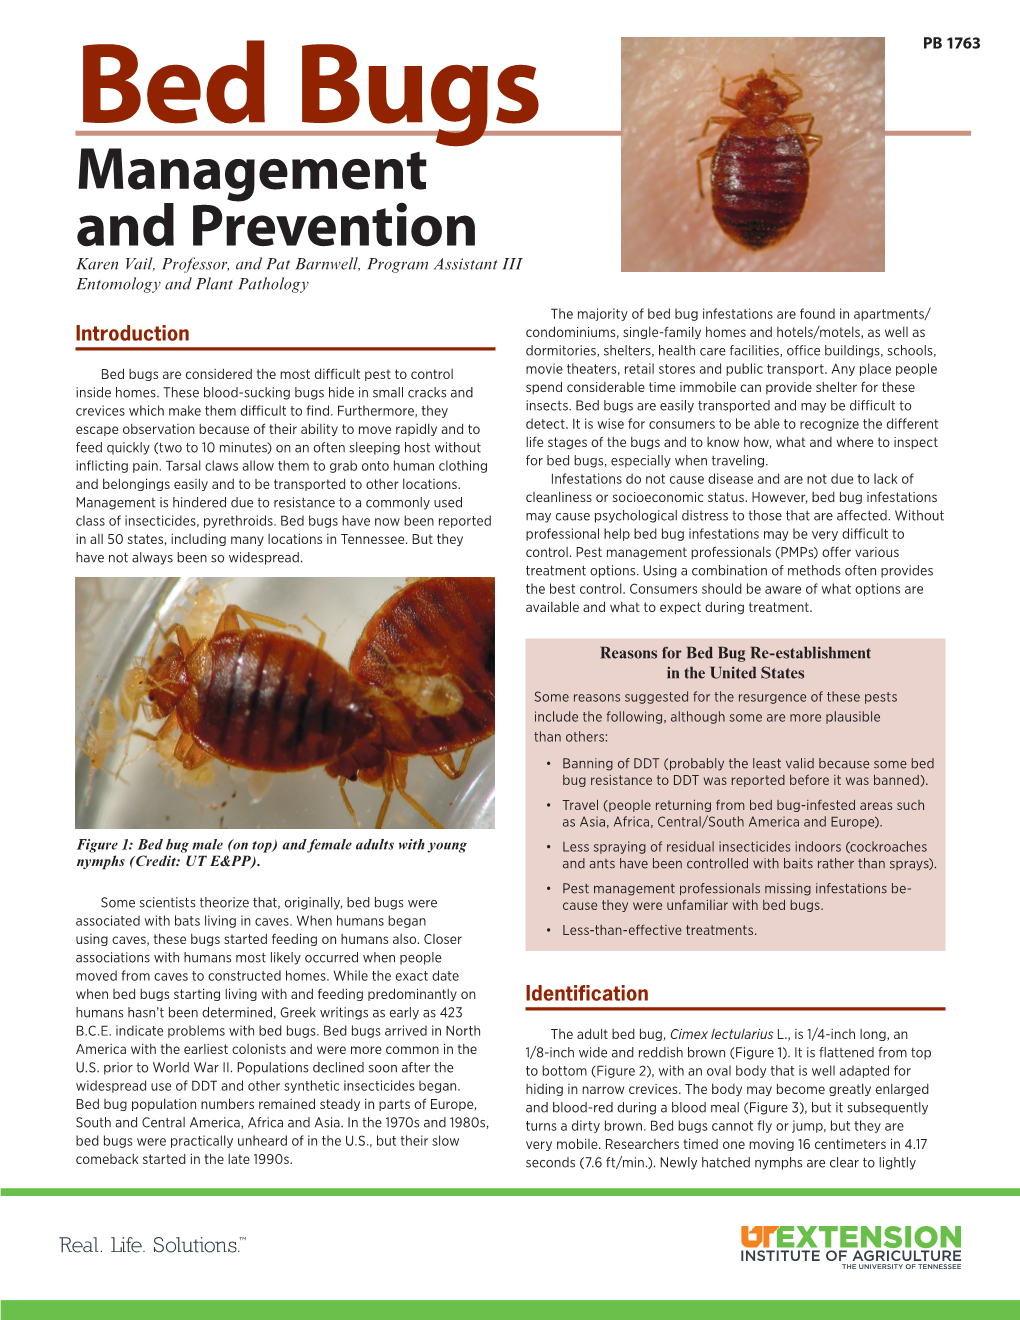 Bed Bugs: Management and Prevention